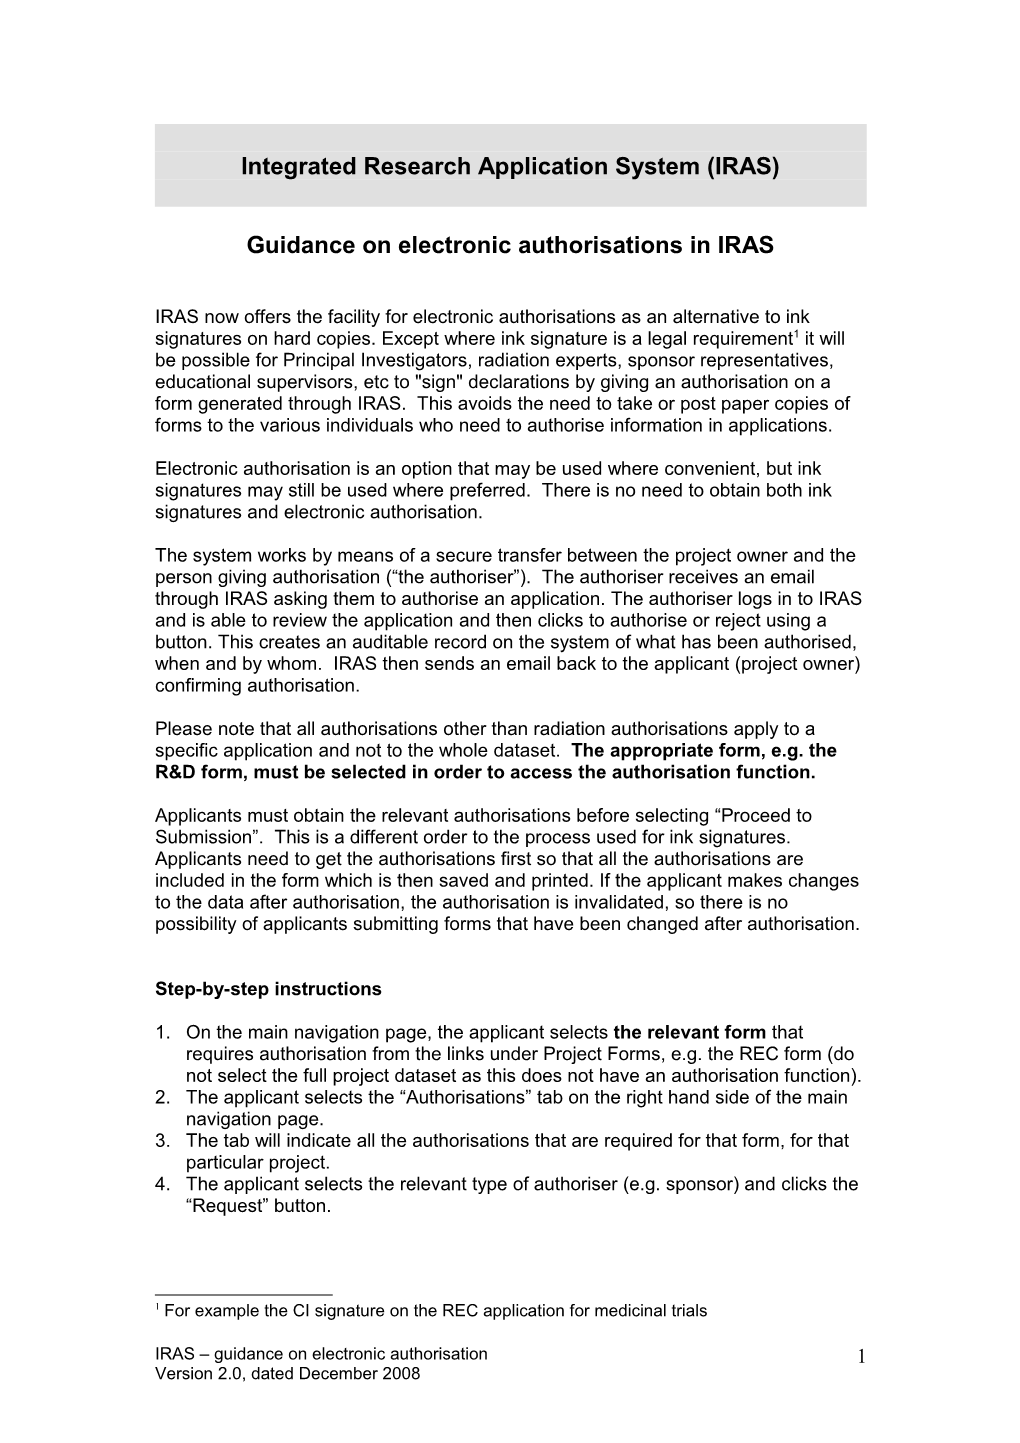 Guidance on Electronic Authorisations in IRAS